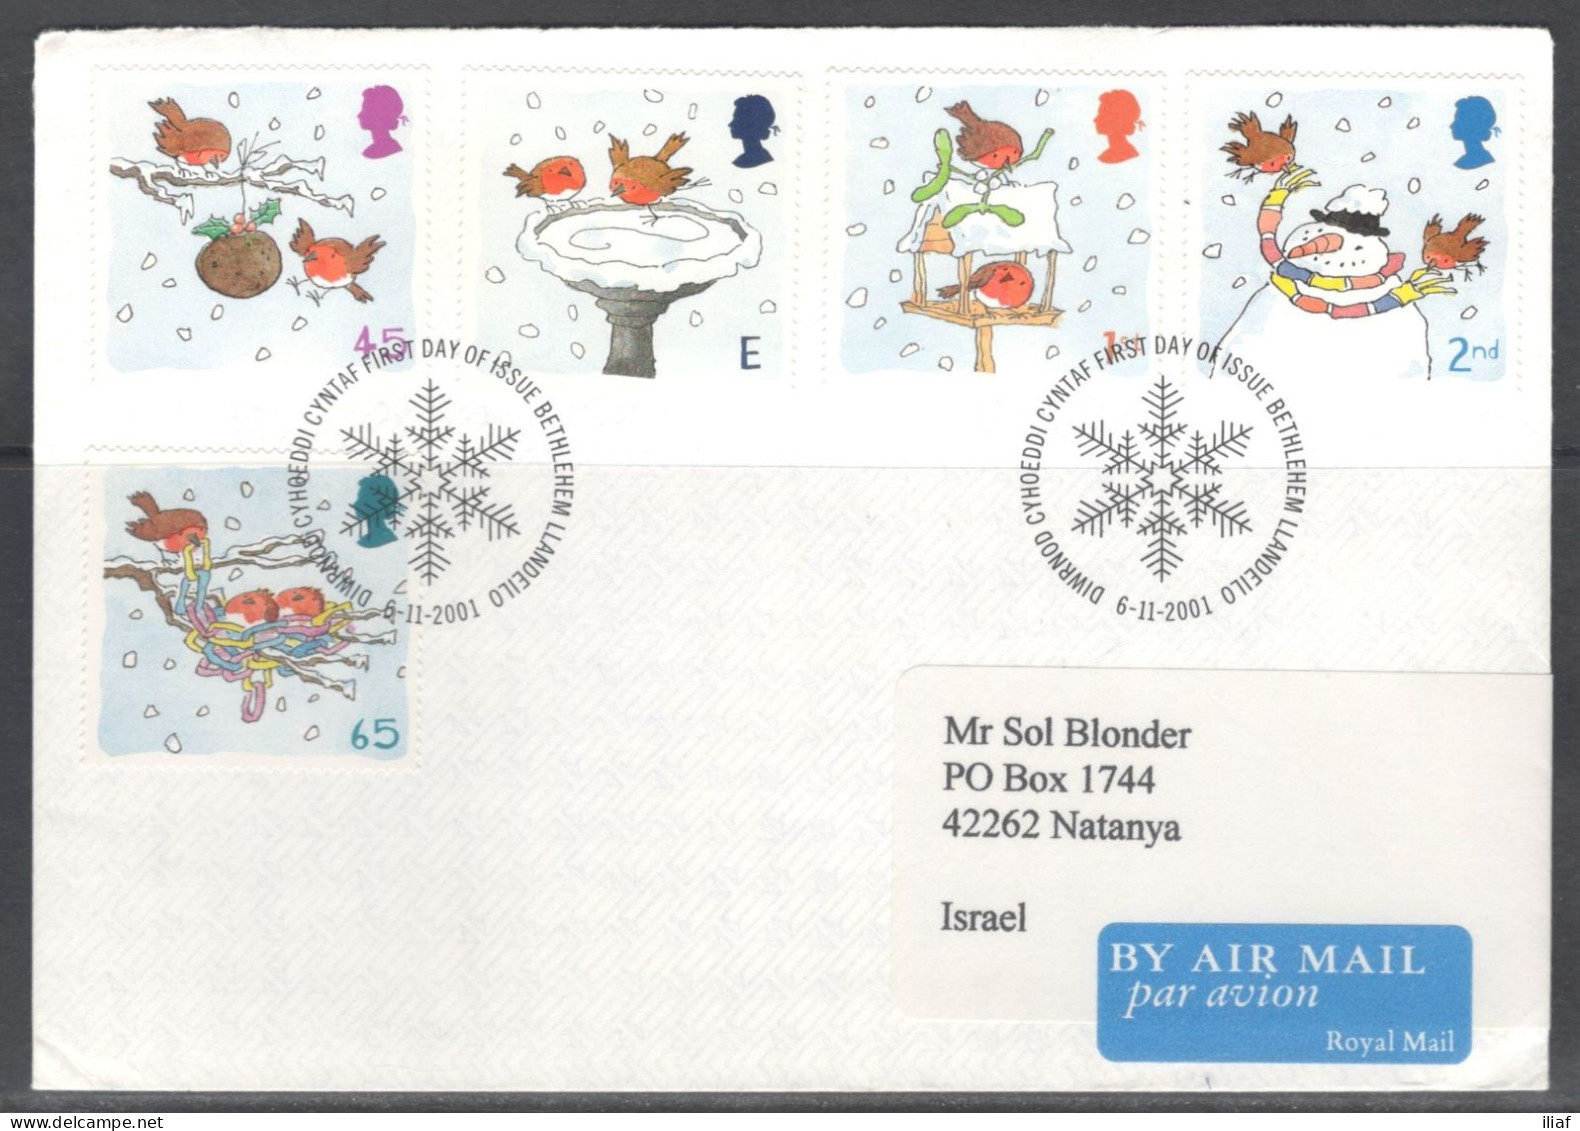 United Kingdom Of Great Britain.  FDC Sc. 2002-2006.  Christmas 2001 - Robins.  FDC Cancellation On Plain Envelope - 1981-1990 Decimal Issues